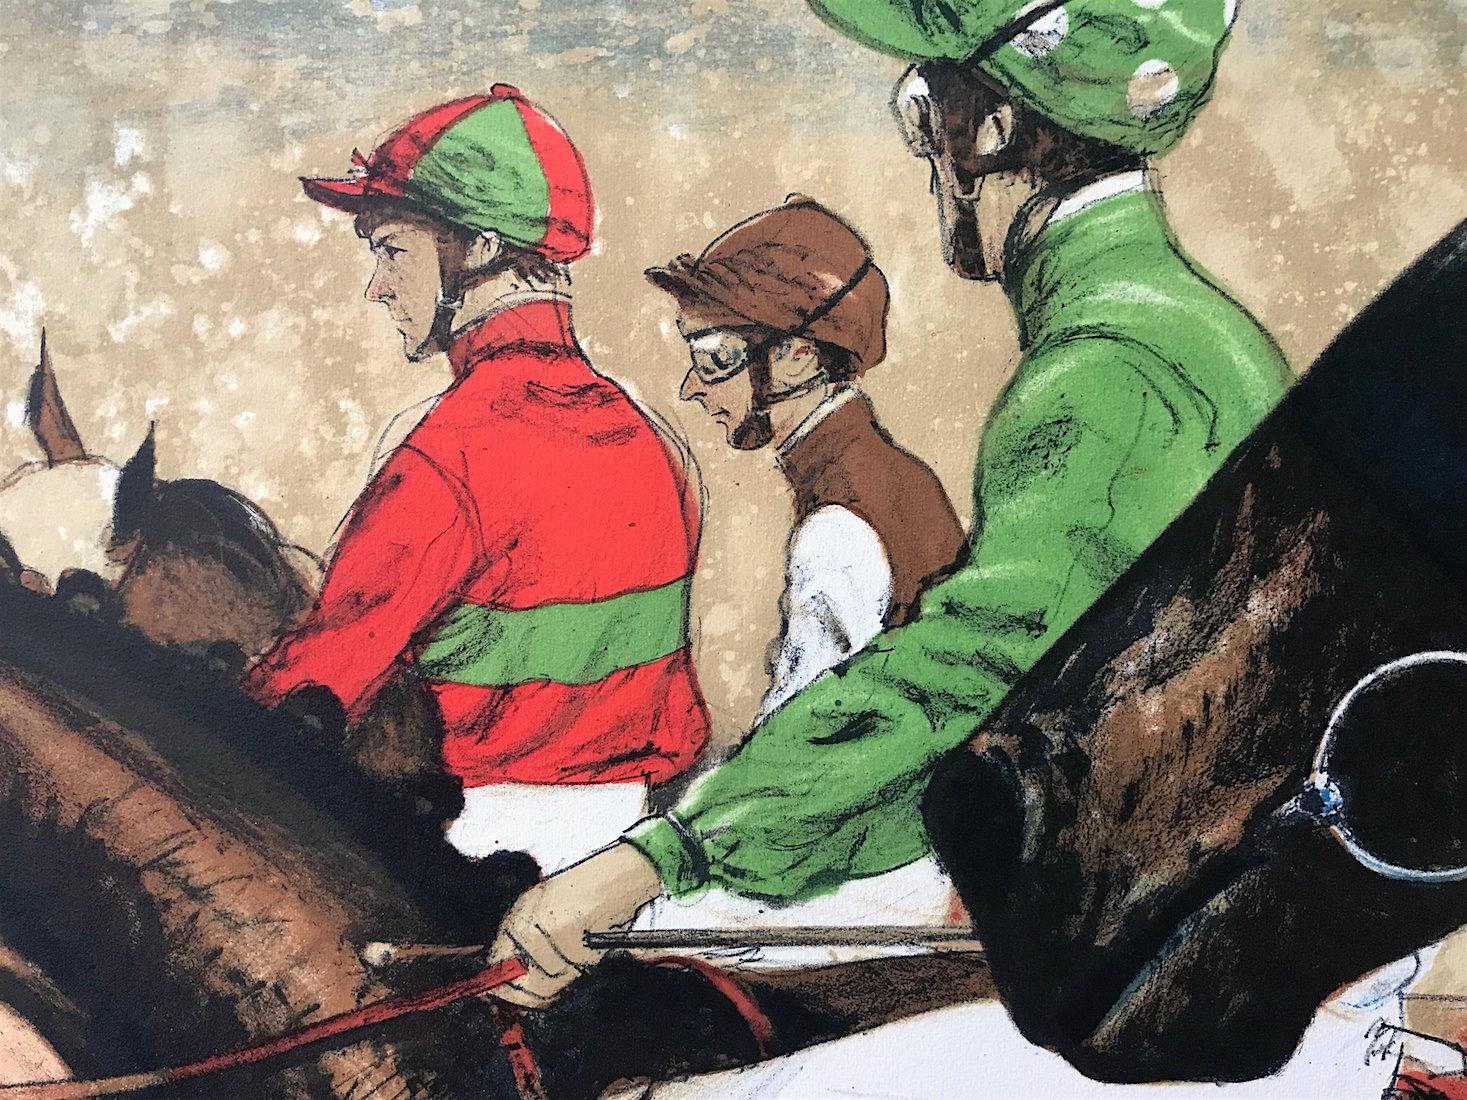 Race Day, Signed Lithograph, Horse Racing - Realist Print by Henry Koehler